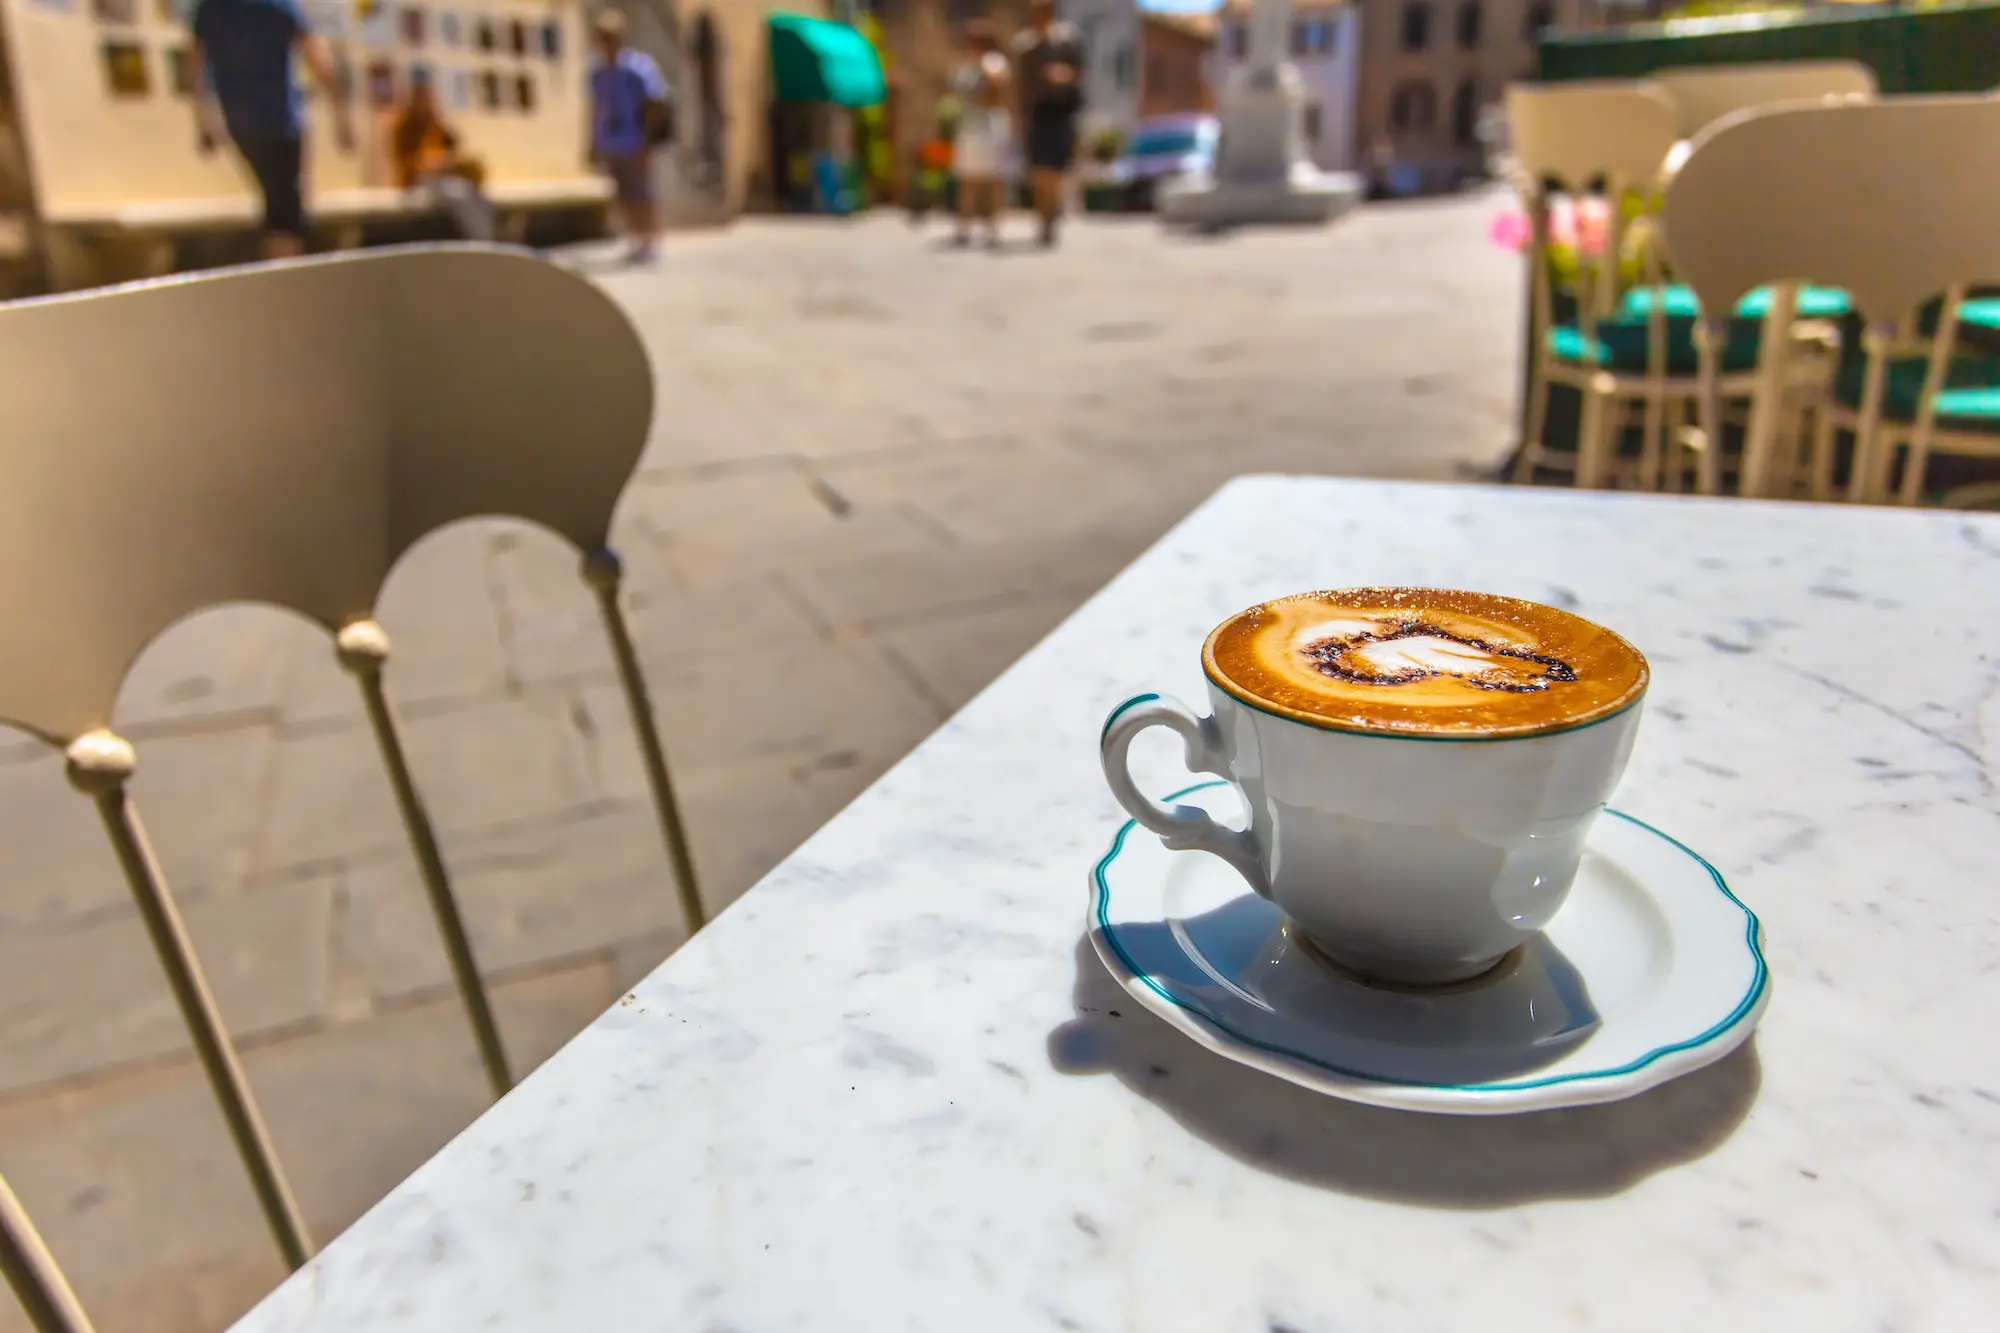 Italian Cup of Coffee at a Cafe Terrace with Street View, Italy